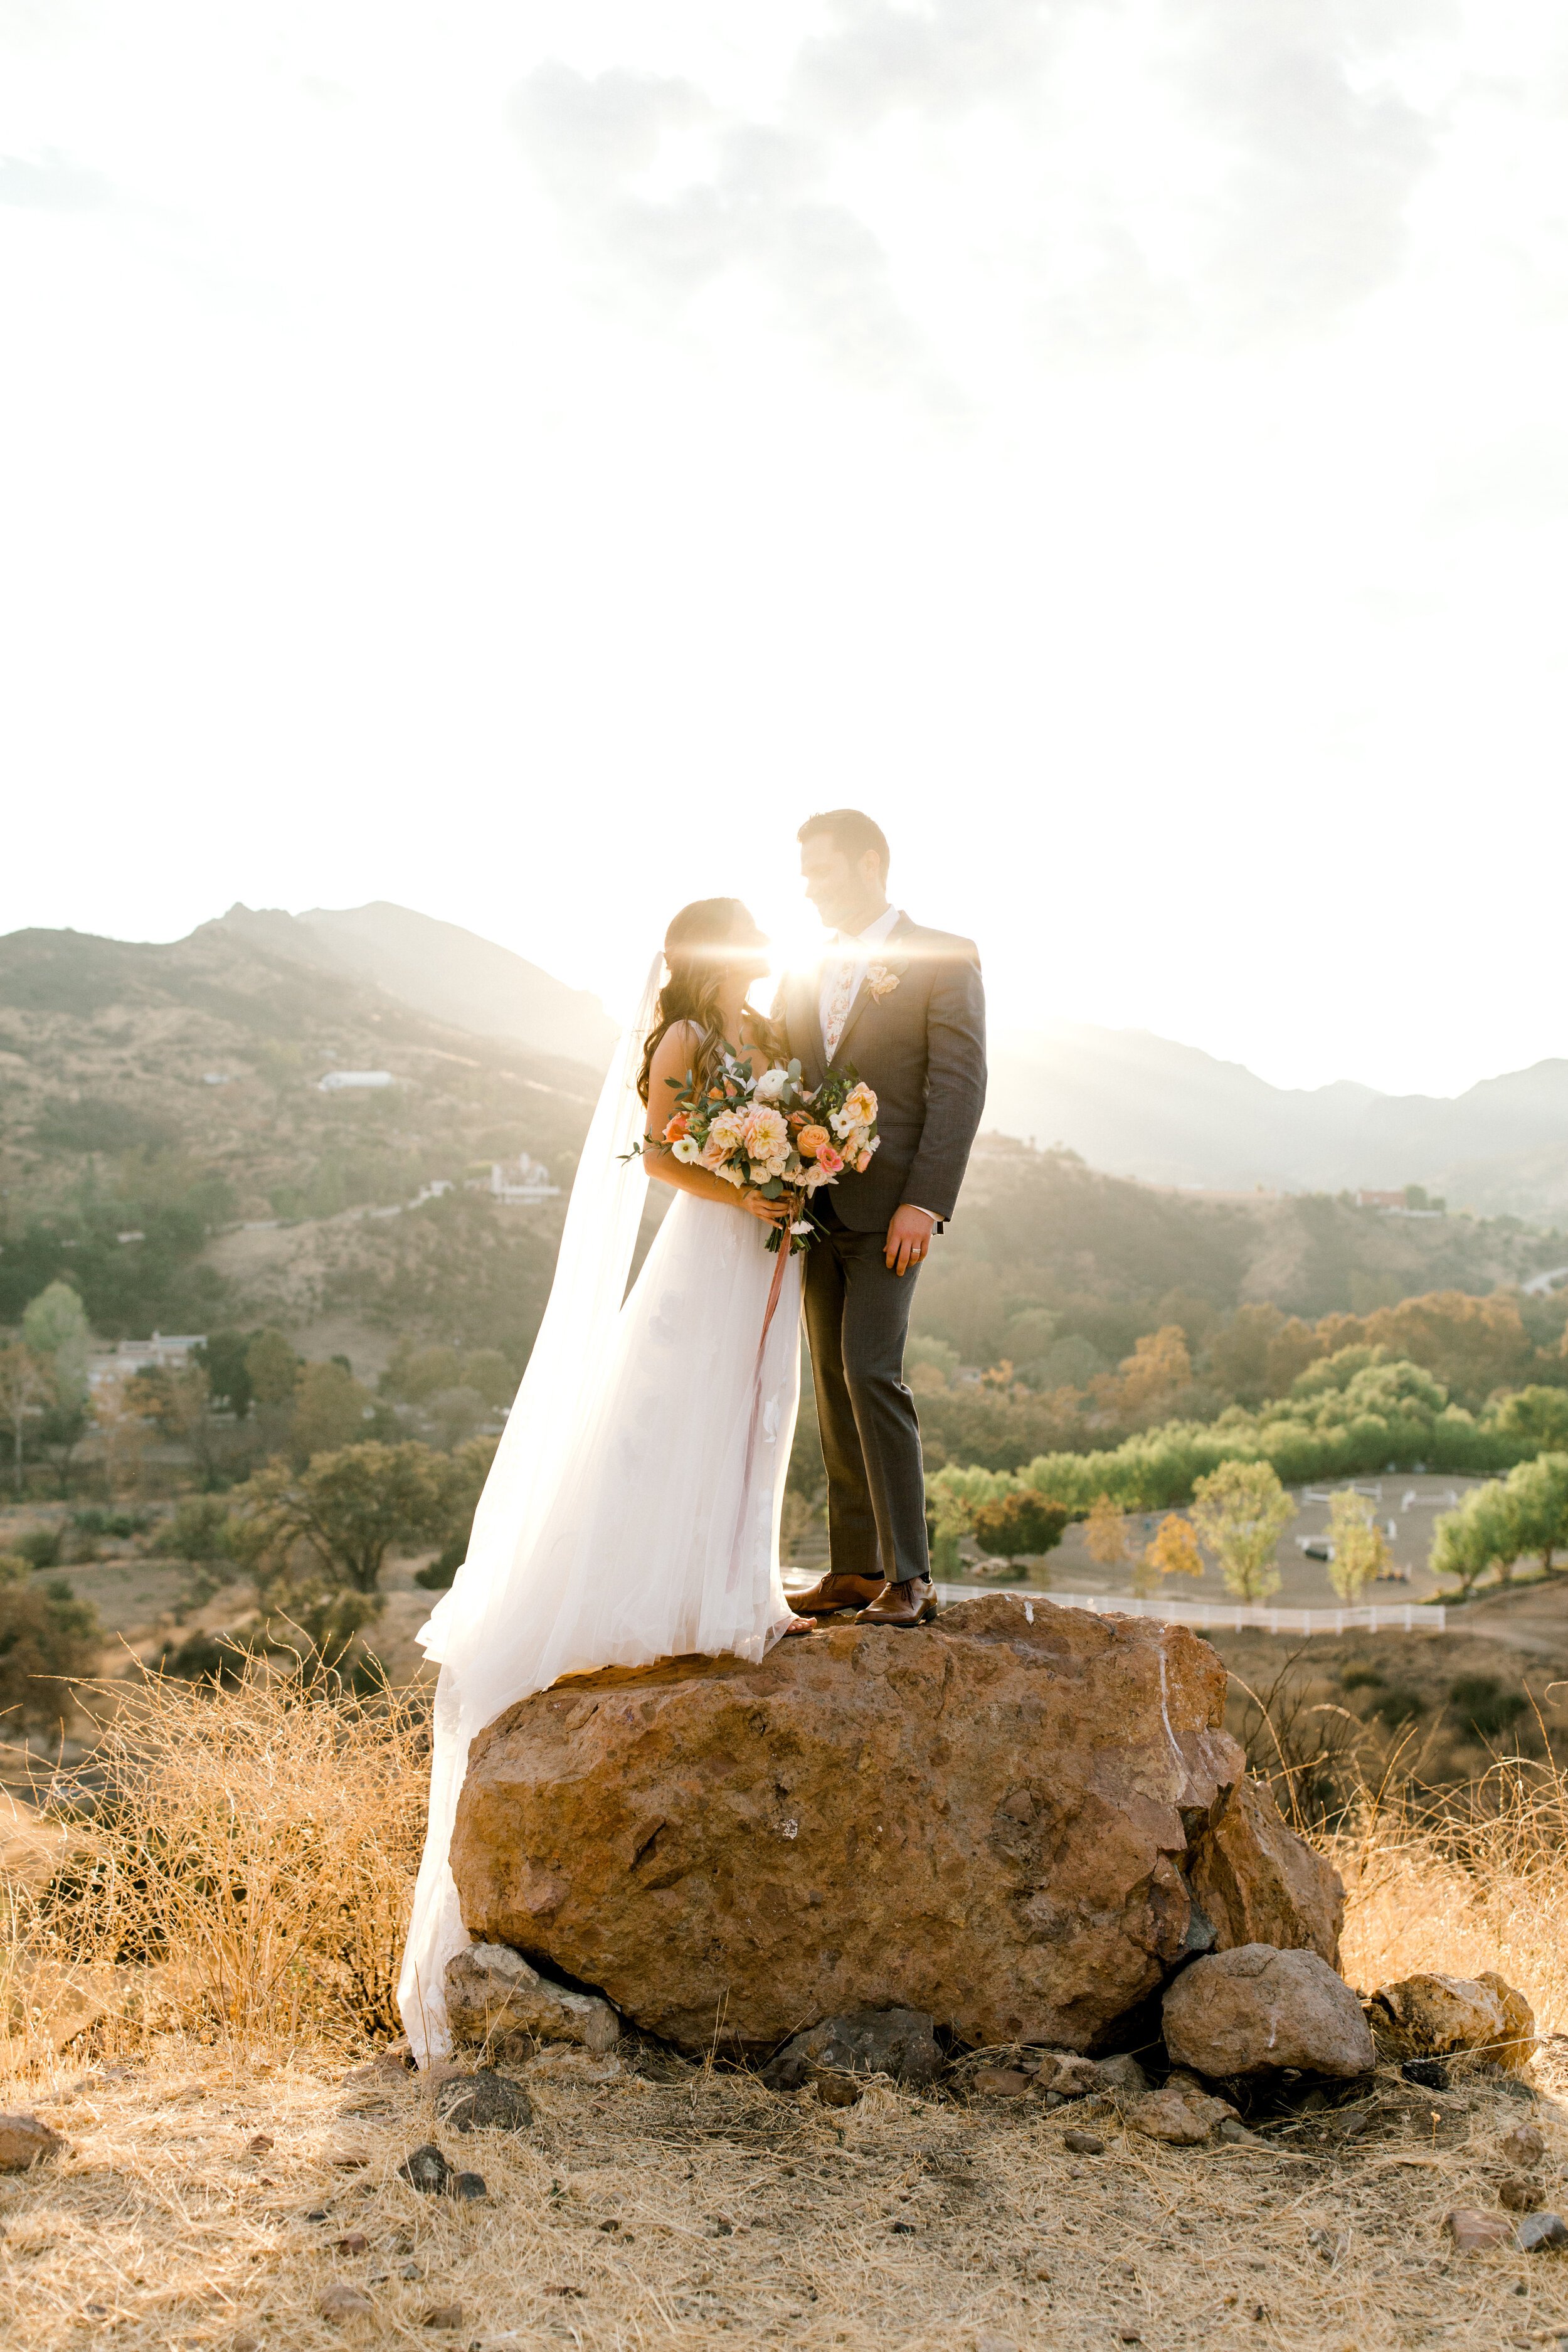 www.santabarbarawedding.com | Events by Fran | Brooke Borough Photography | Triunfo Creek Vineyards | Velvet Blooms | Blushing Beauty | Bride and Groom with Scenic Background